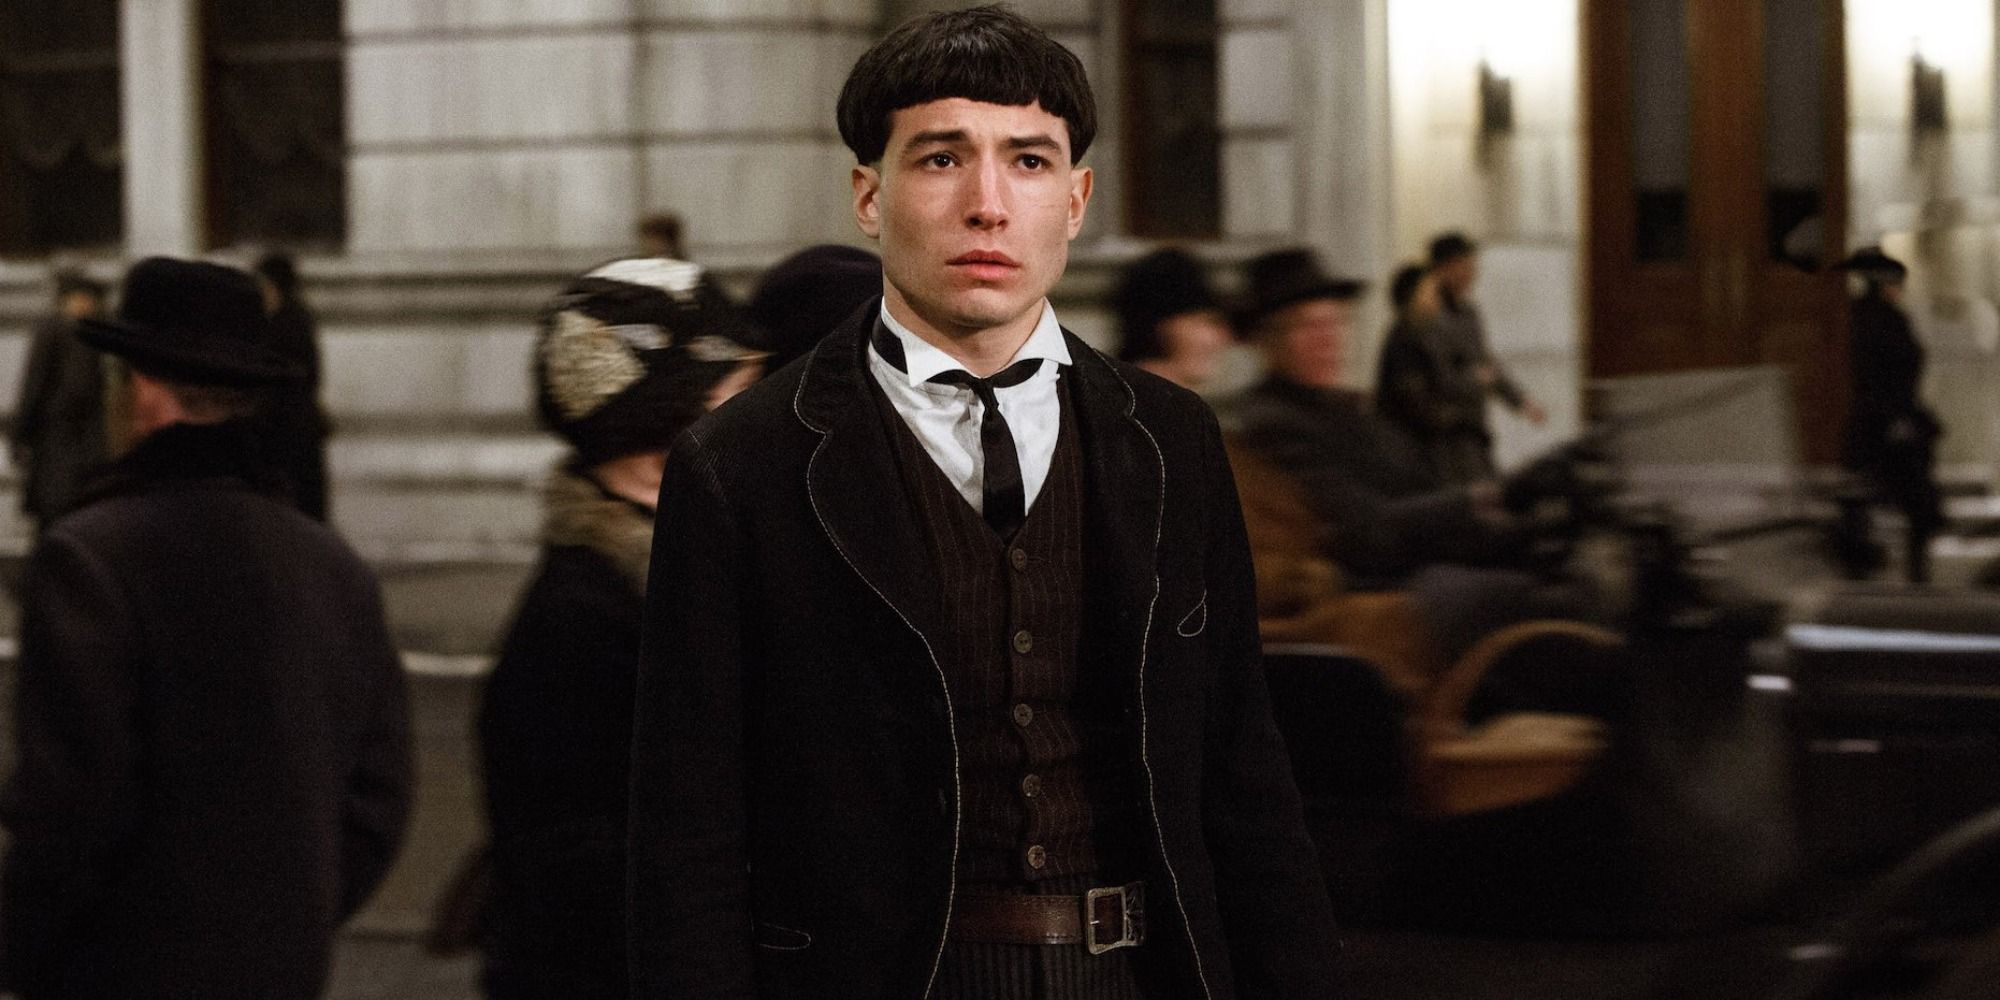 A screenshot of Credence Barebone in Fantastic Beasts and Where To Find Them